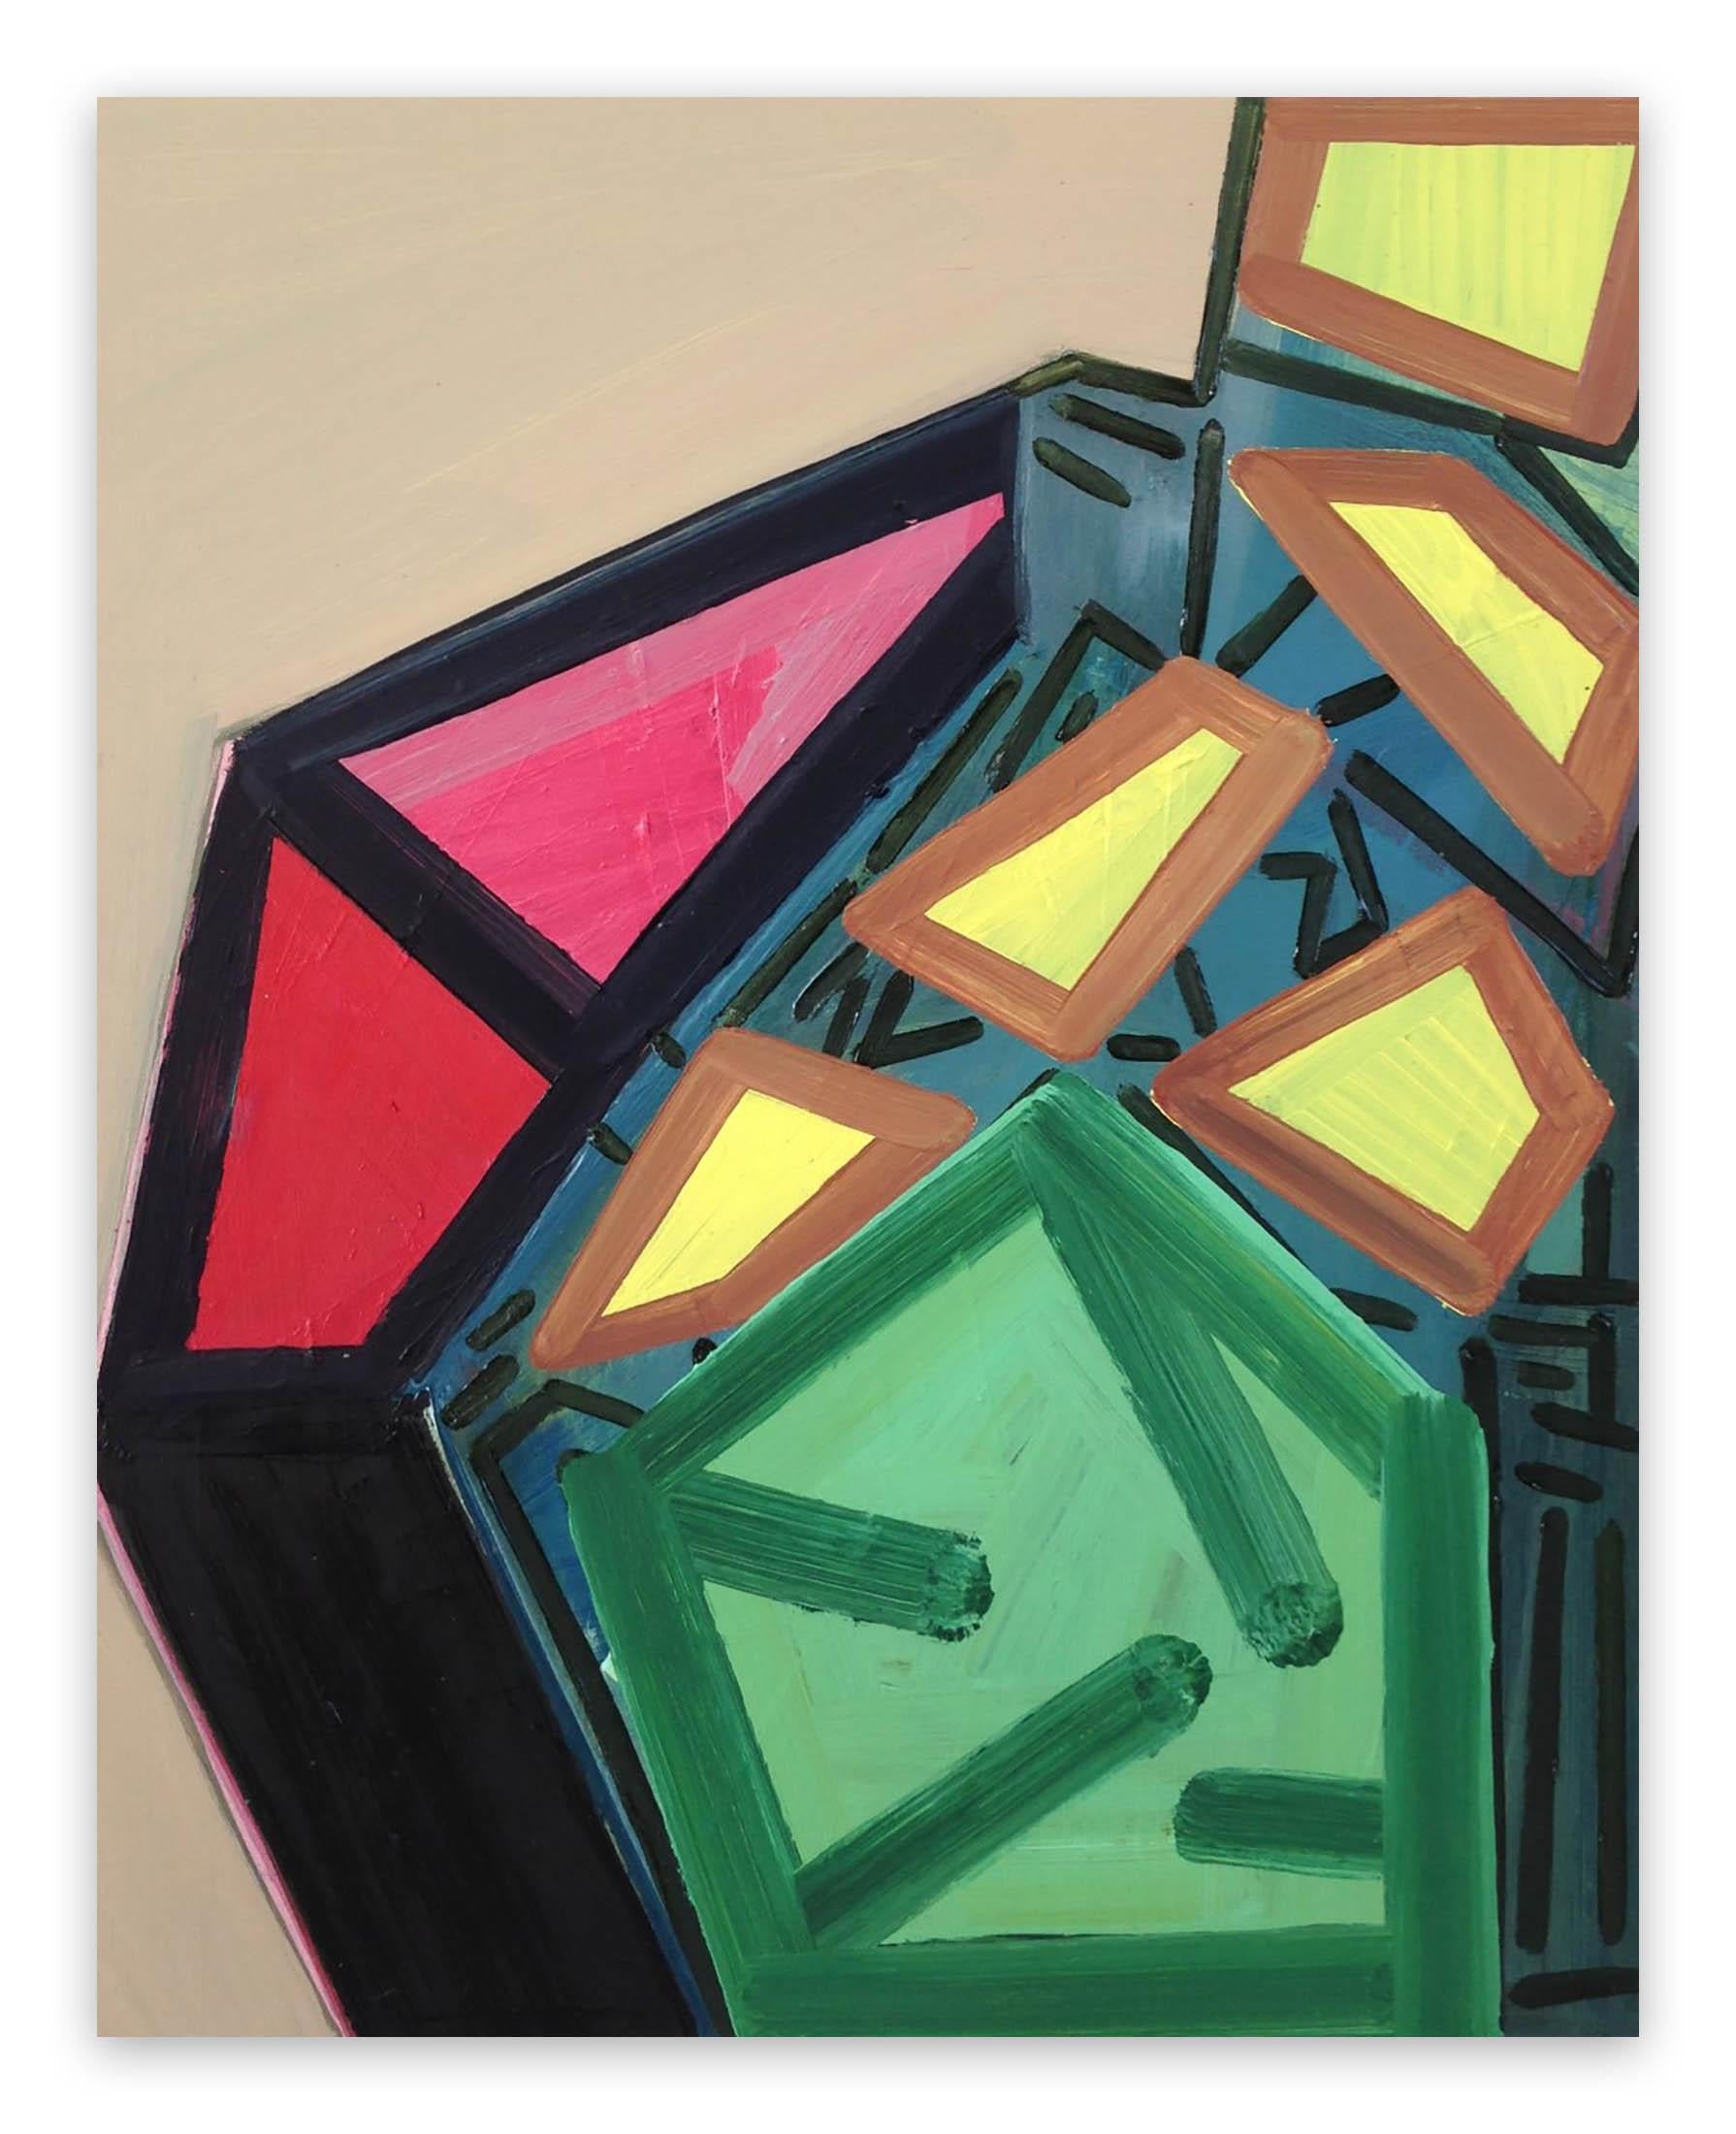 Intersection (Abstract Painting)

Oil on panel - Unframed

Ashlynn Browning's recurring use of grids, networks may recall architectural structures, but these are only created in response to the paint as she works, instinctively.

Colors, which play